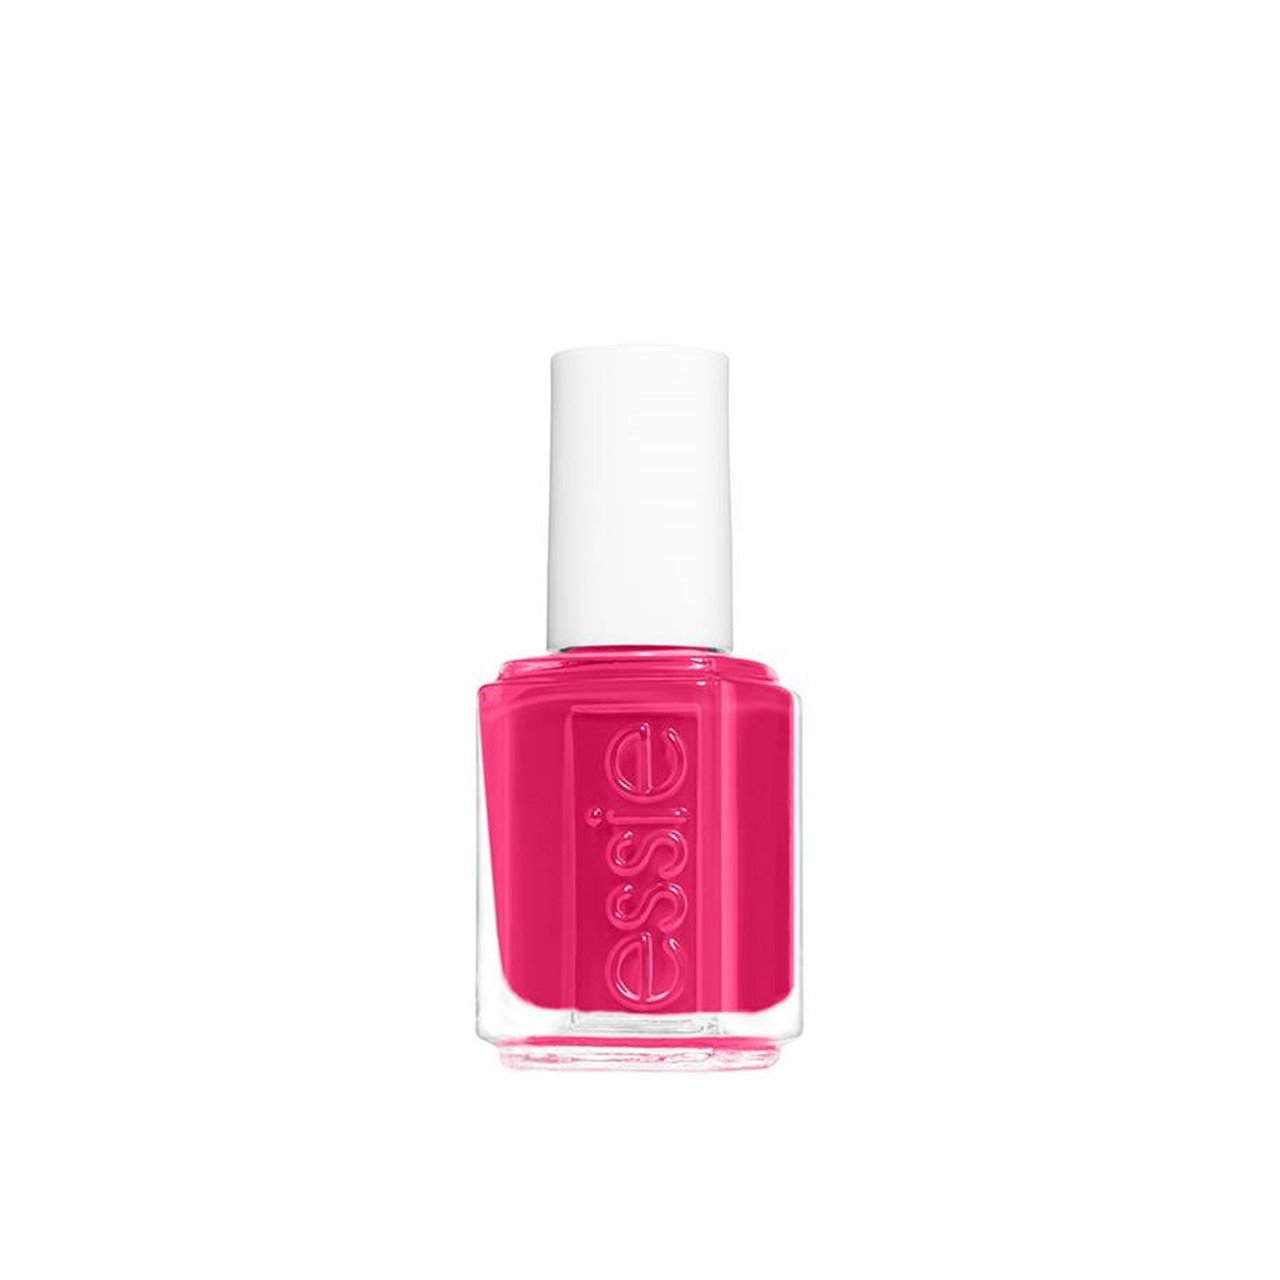 NOTD Essie Neon 09  Punchy Pink  Cherry Colors  Cosmetics Heaven